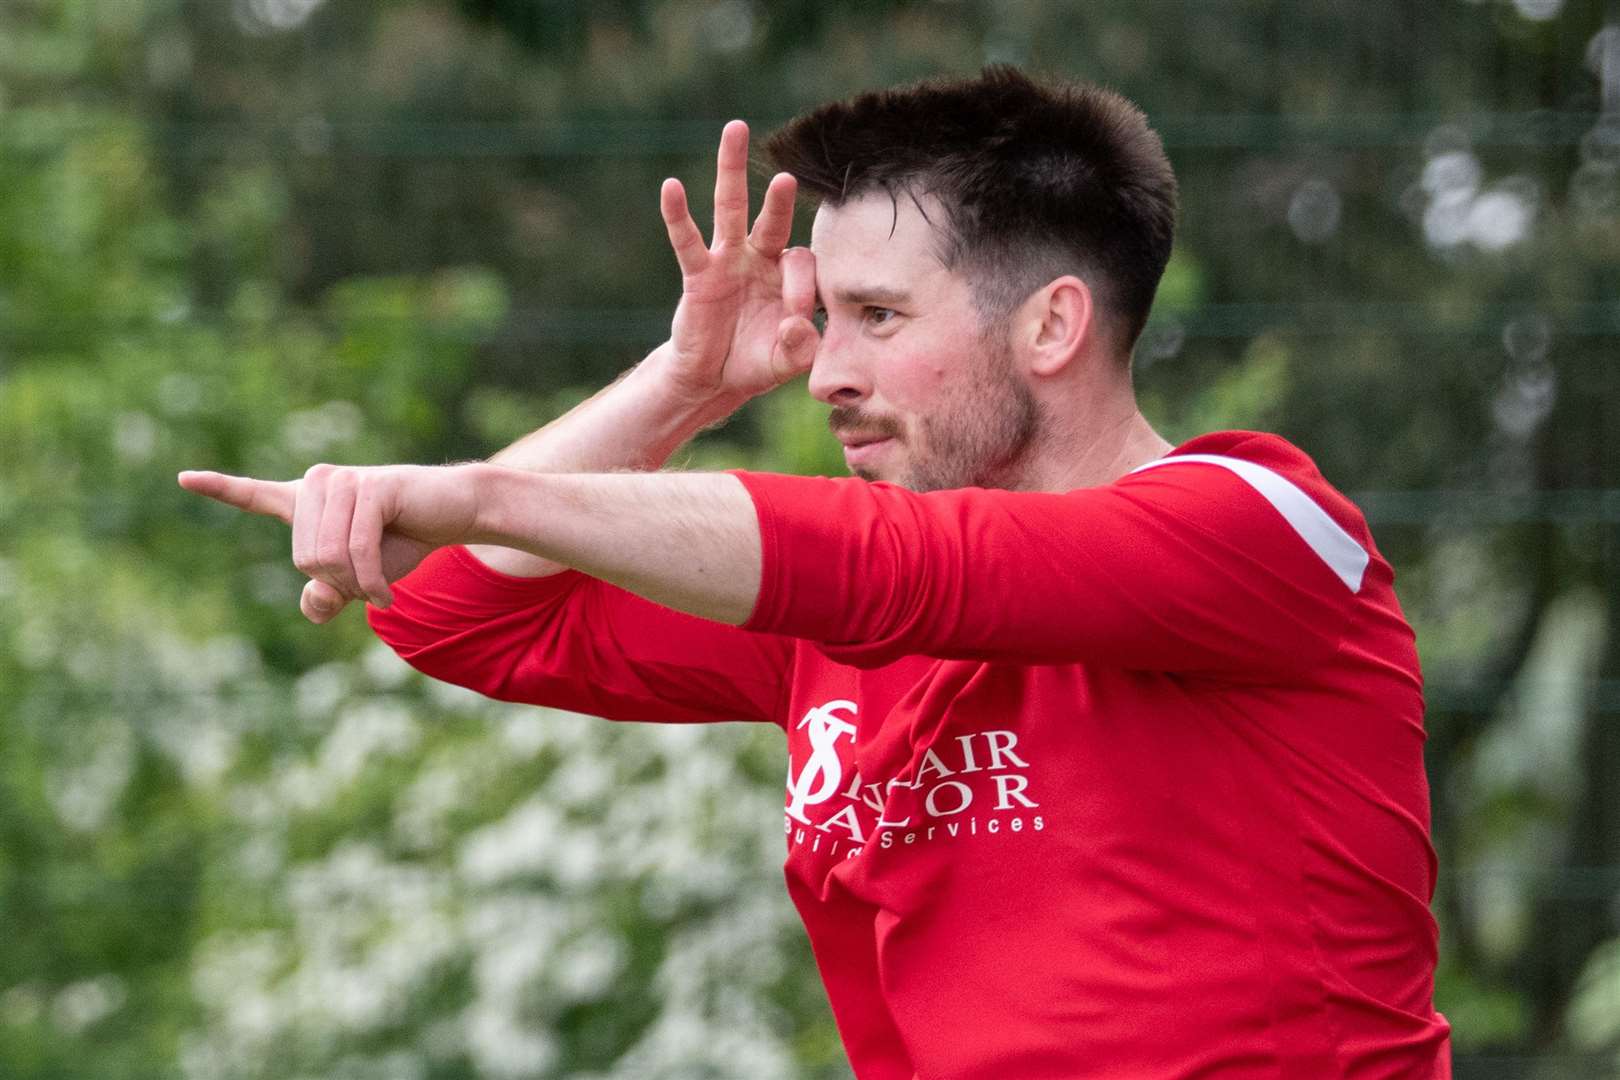 Forres Thistle's Matthew Fraser celebrates his goal after he makes it 1-1 in the first half...Dufftown FC (2) vs Forres Thistle FC (2) - Dufftown FC win 5-3 on penalties - Elginshire Cup Final held at Logie Park, Forres 14/05/2022...Picture: Daniel Forsyth..